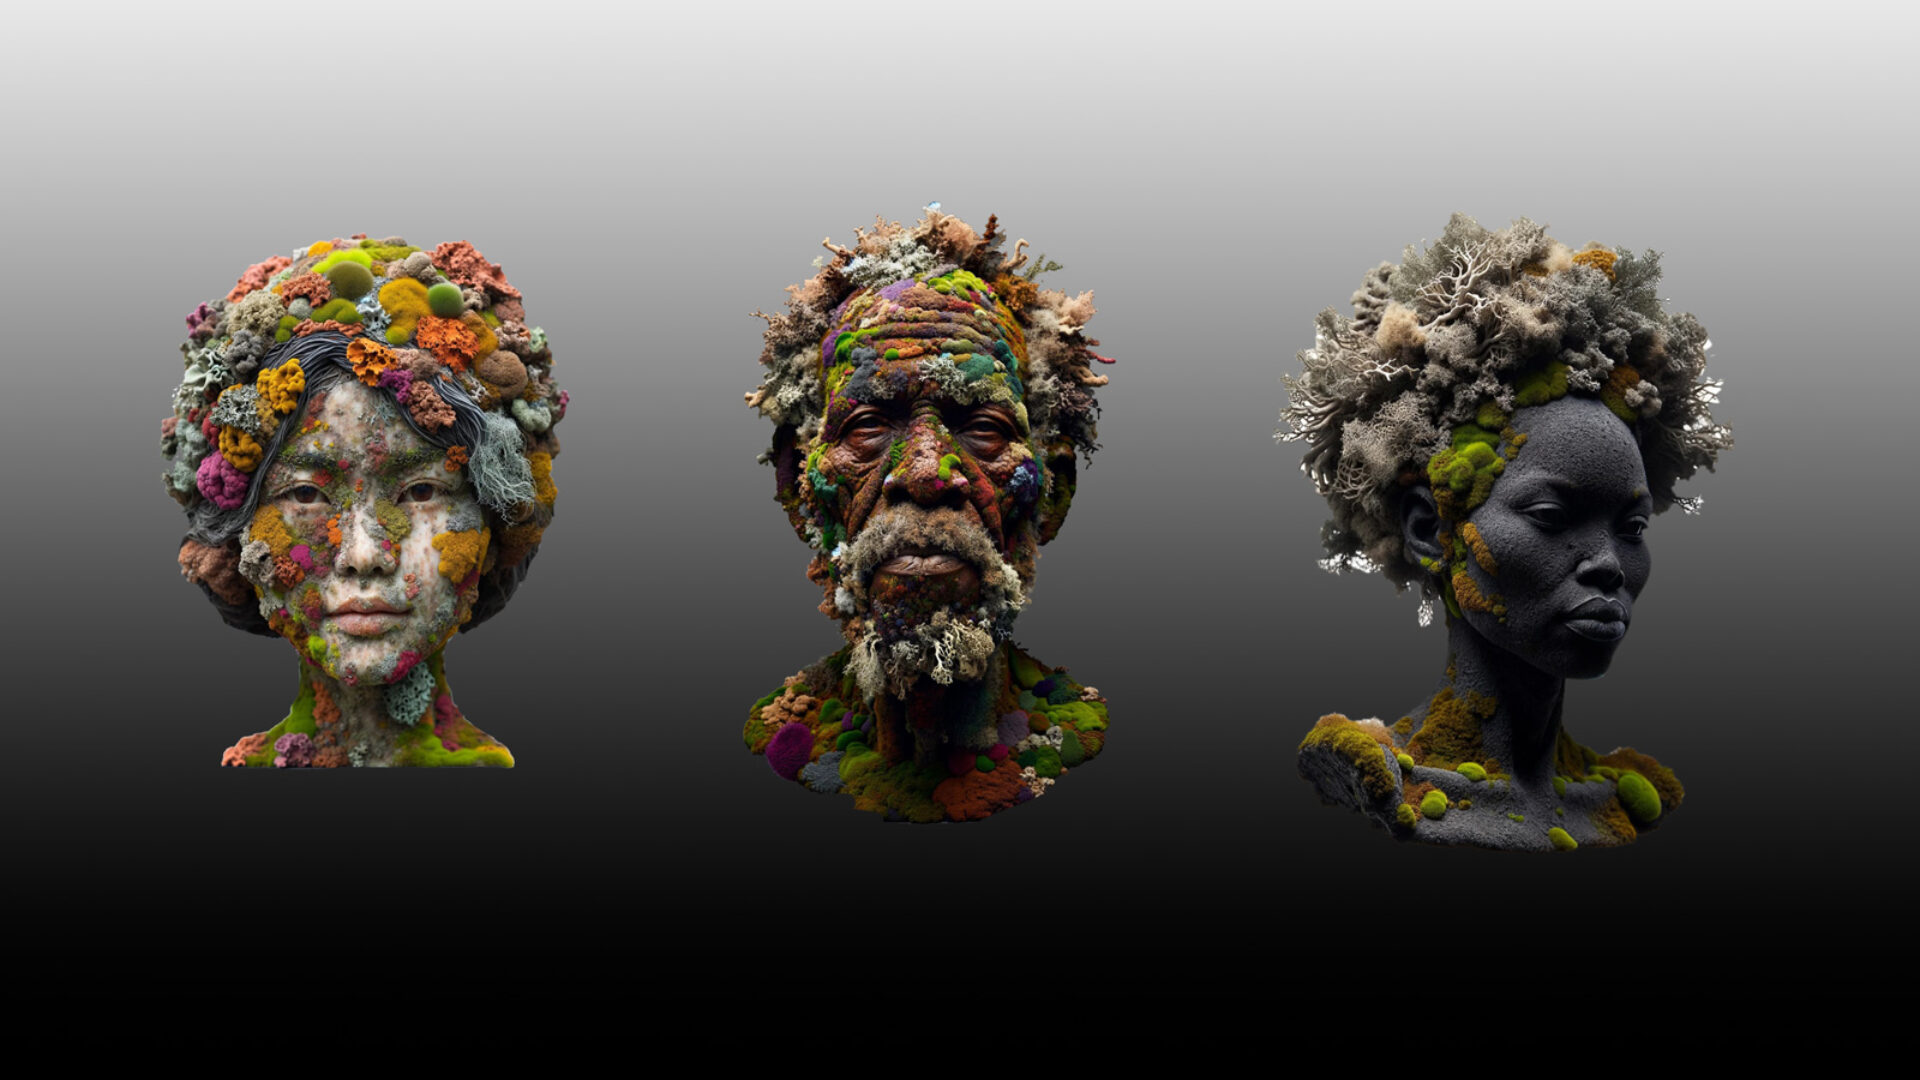 An image from Keir Williams and Riley Heasley showing work-in-progress from their exhibition work. A still from a video of a 3D-rendered granite bust of an adult's head; moss, lichen, and fungi grow and completely cover it.